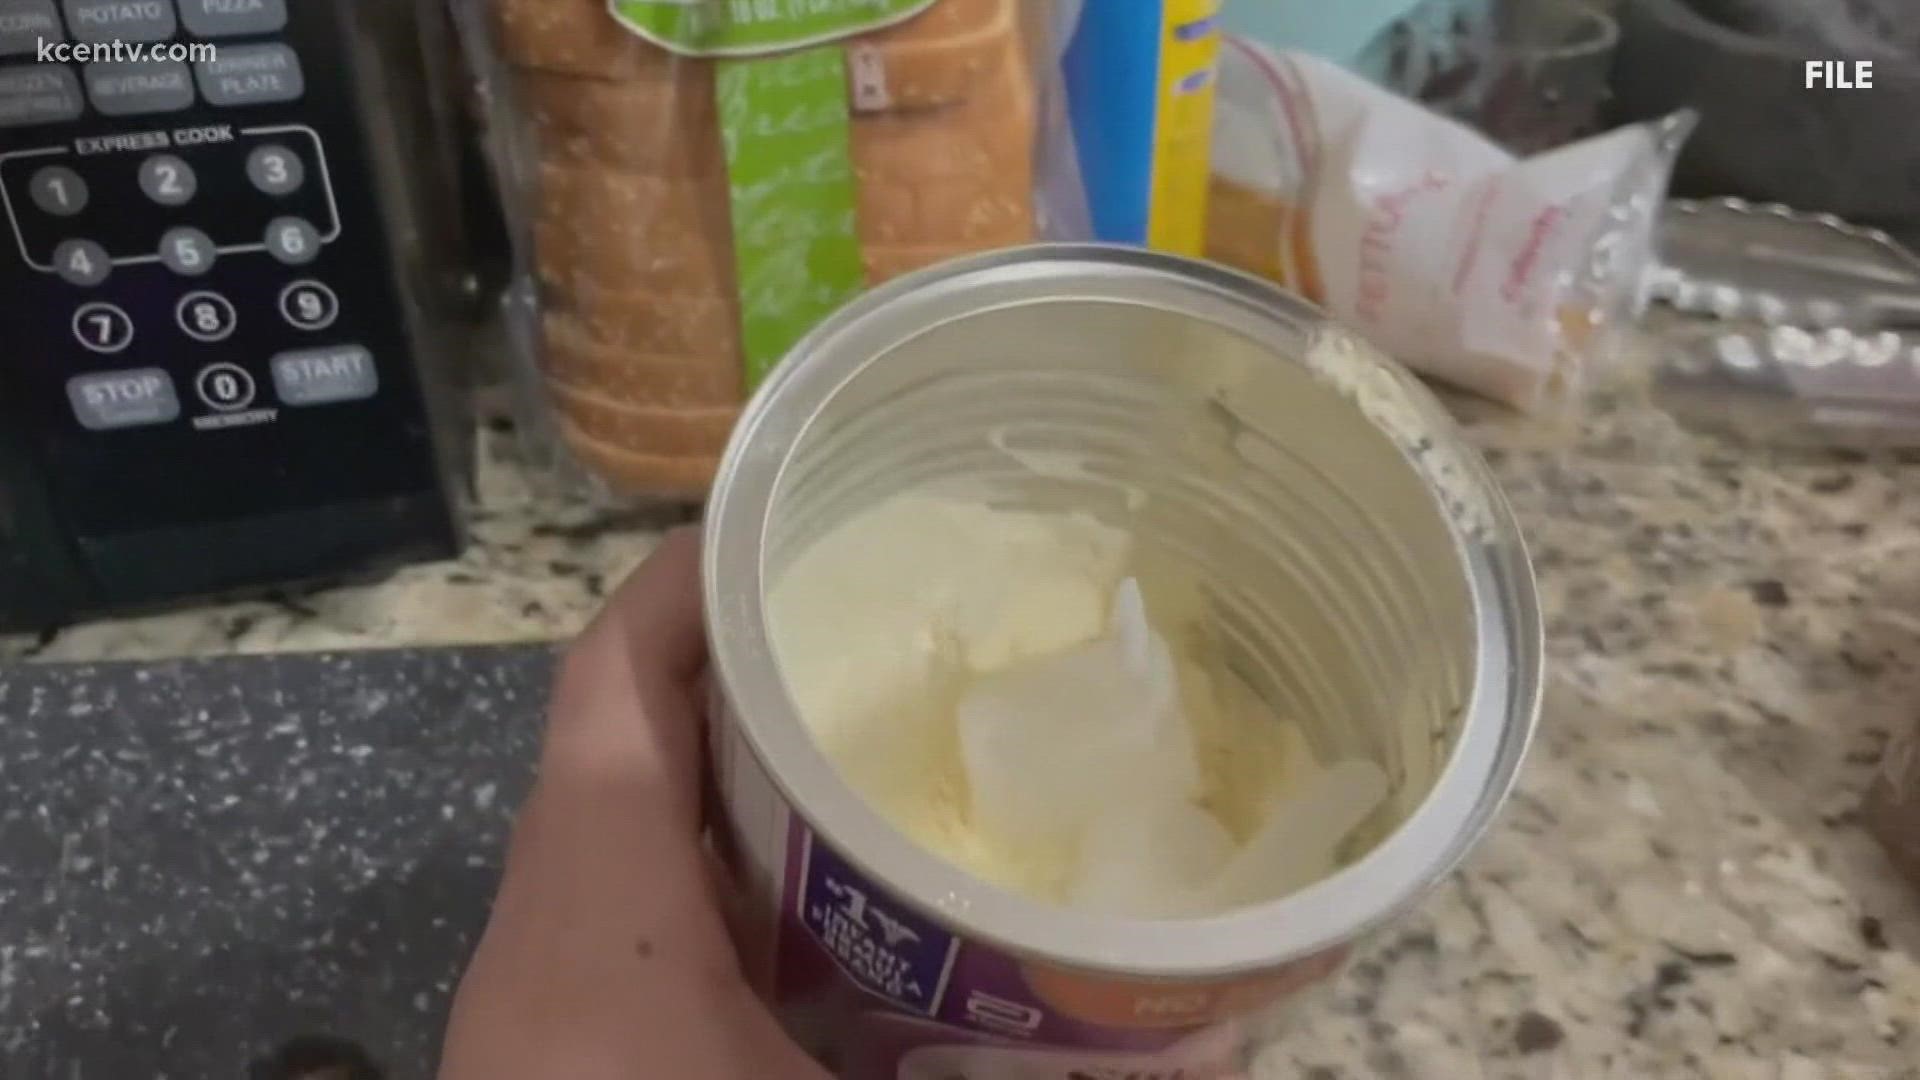 A nationwide baby formula recall has parents in Central Texas scrambling to find milk for their babies.